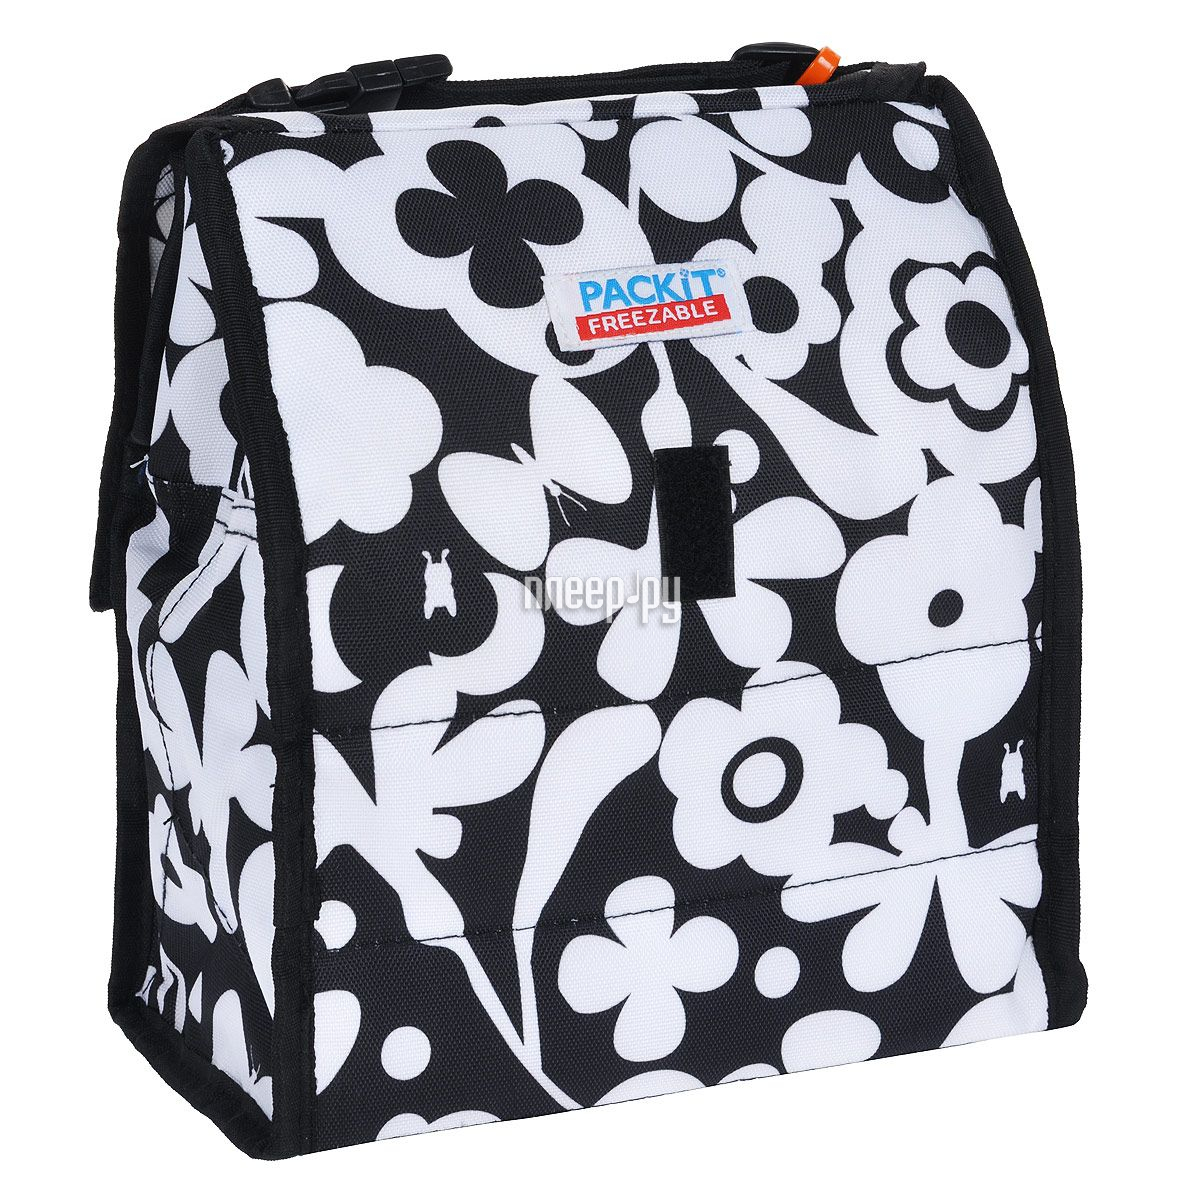  Packit Personal Cooler Black-White PKT-PC-CRU 